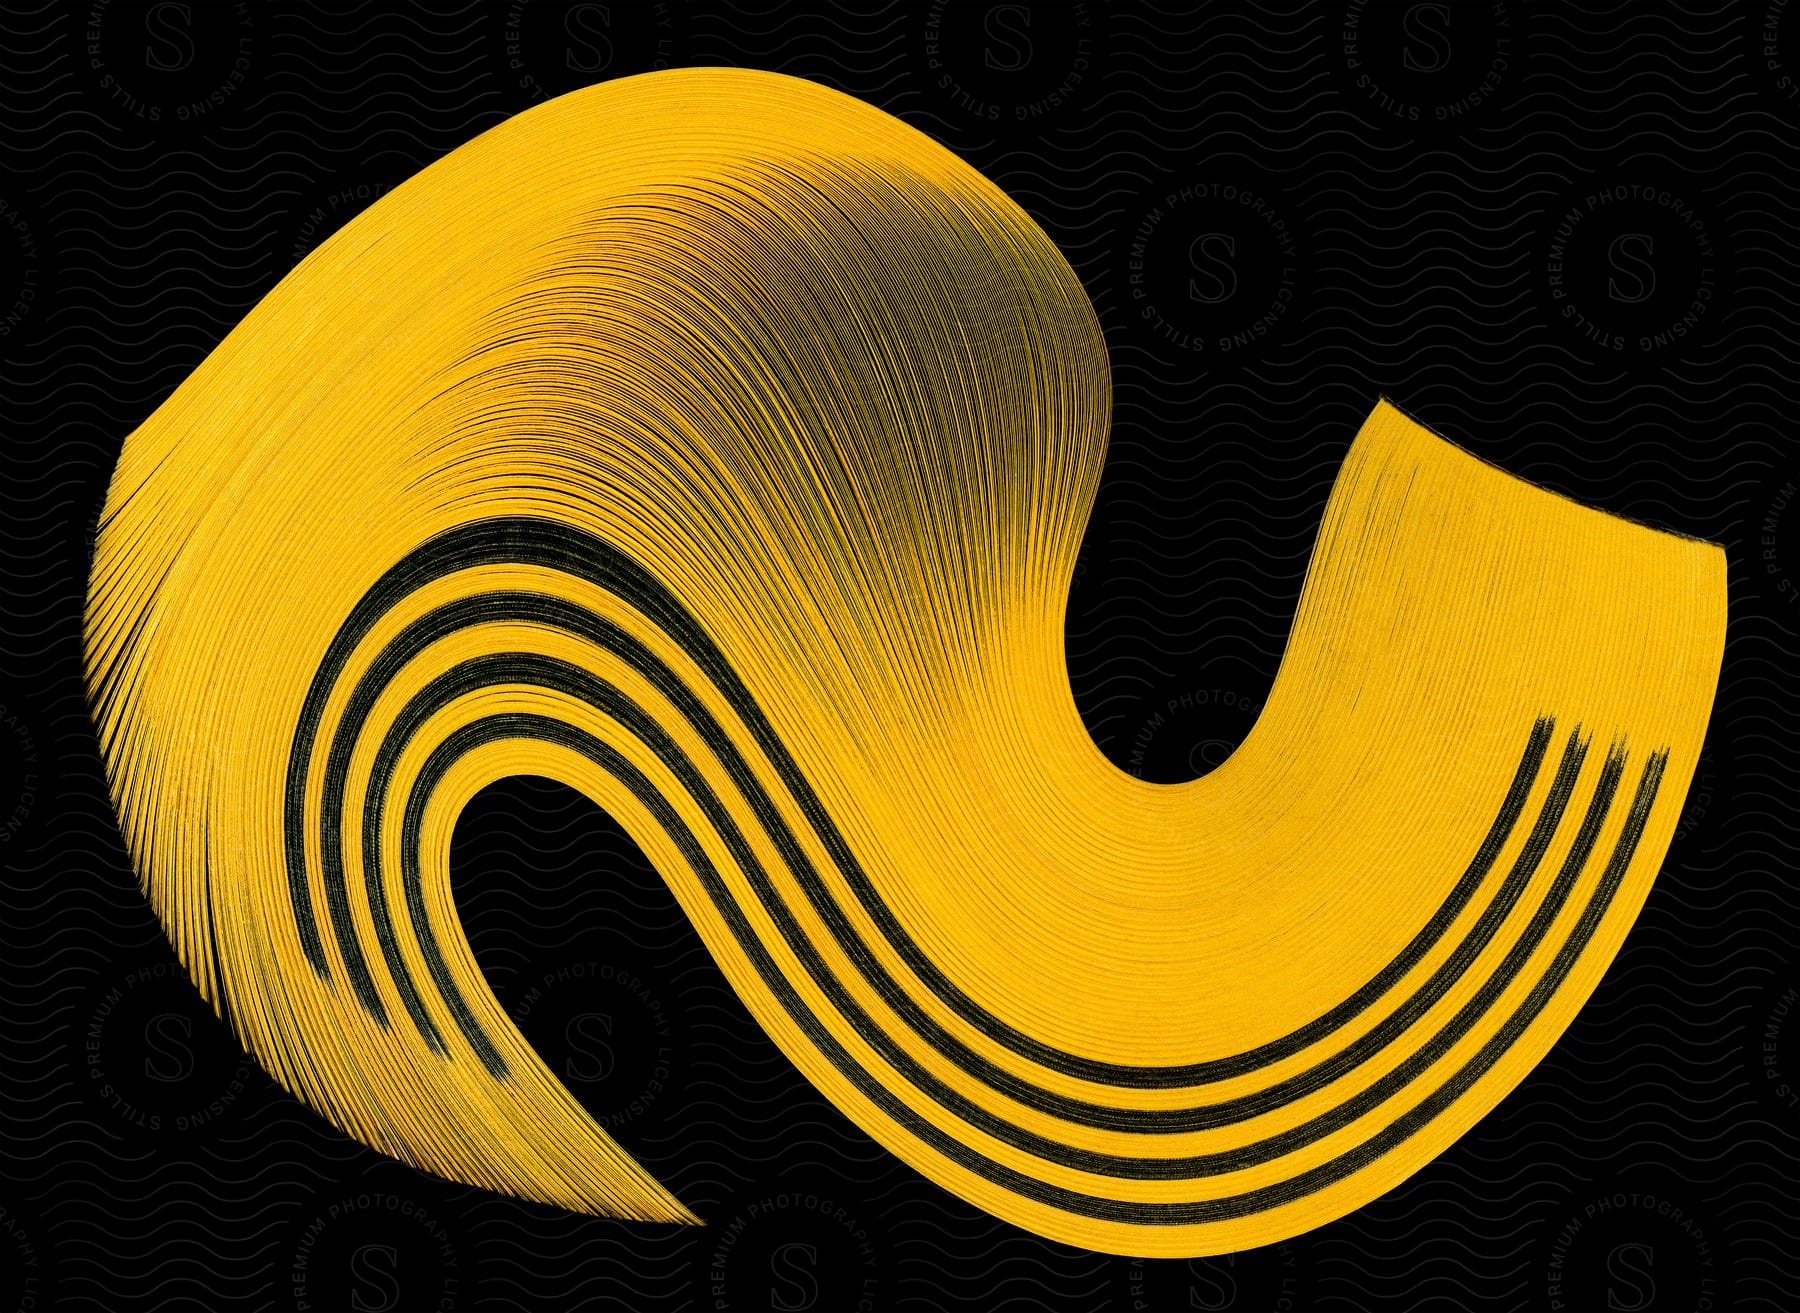 A digital art piece in yellow on a black background